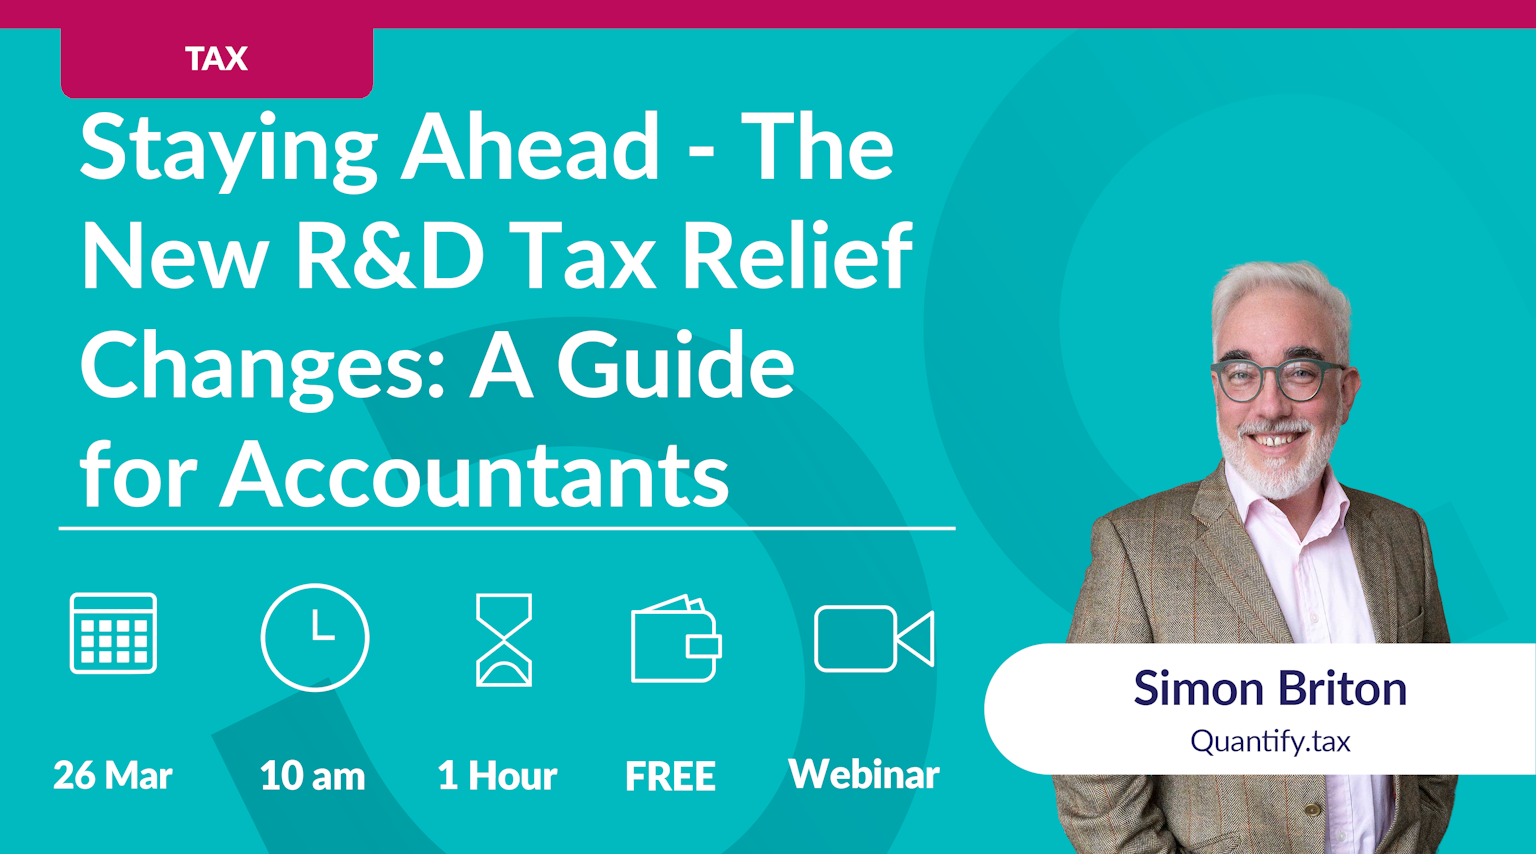 Staying Ahead - The New R&D Tax Relief Changes: A Guide for Accountants